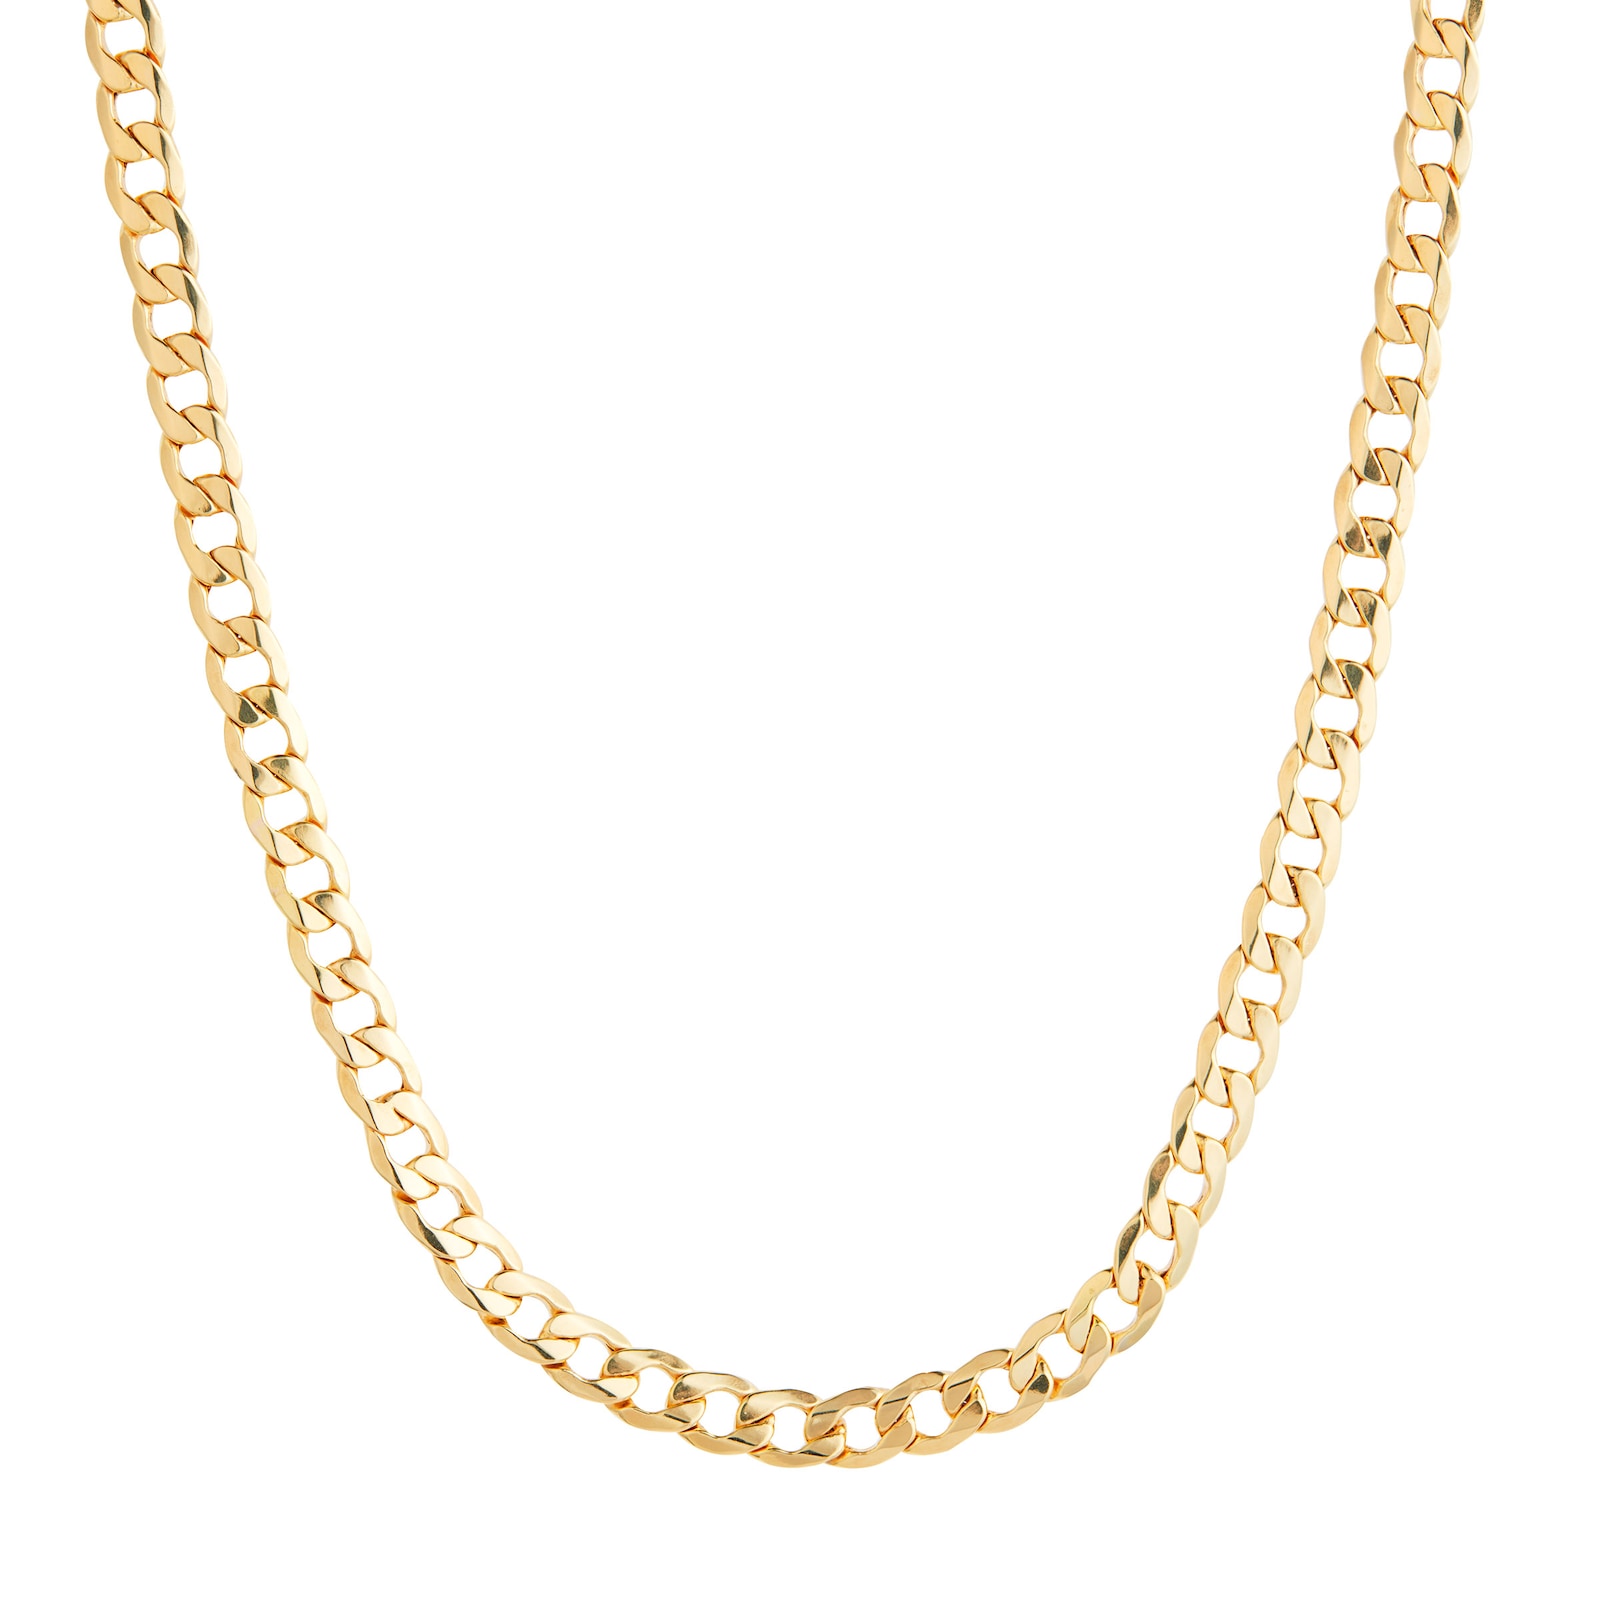 Gold Chain Images Free Download On Freepik | atelier-yuwa.ciao.jp